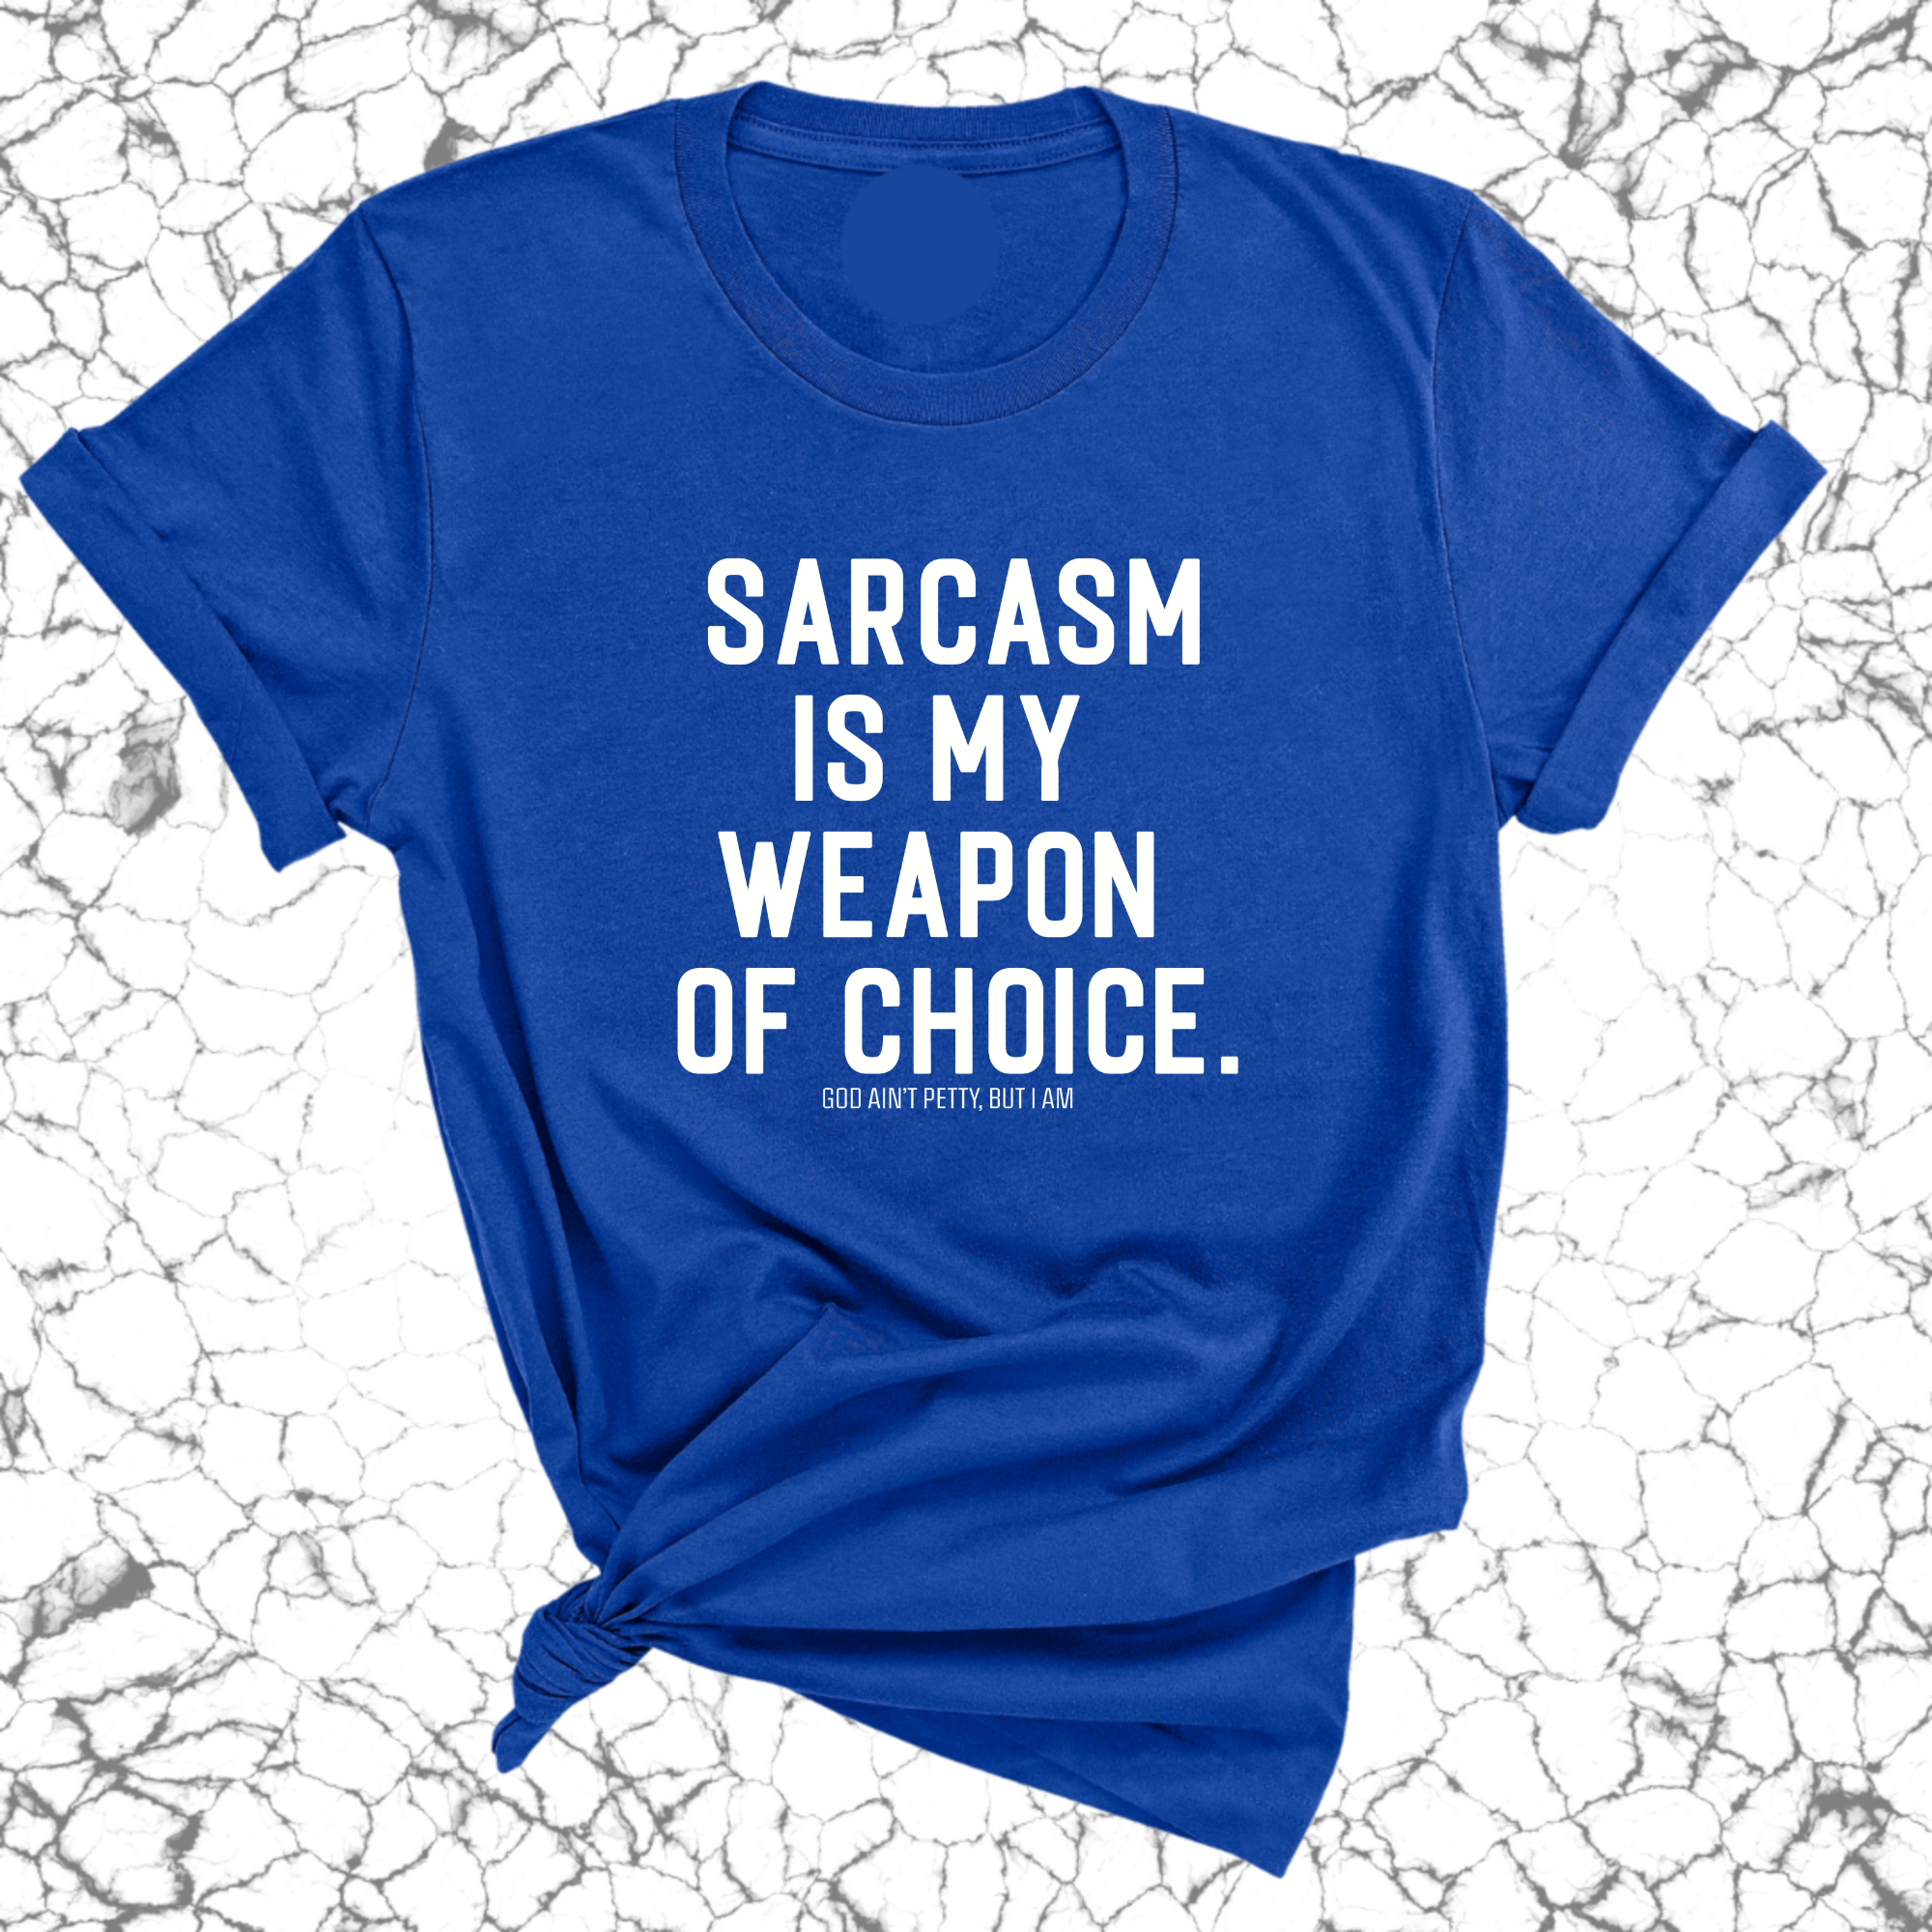 Sarcasm is my weapon of choice Unisex Tee-T-Shirt-The Original God Ain't Petty But I Am